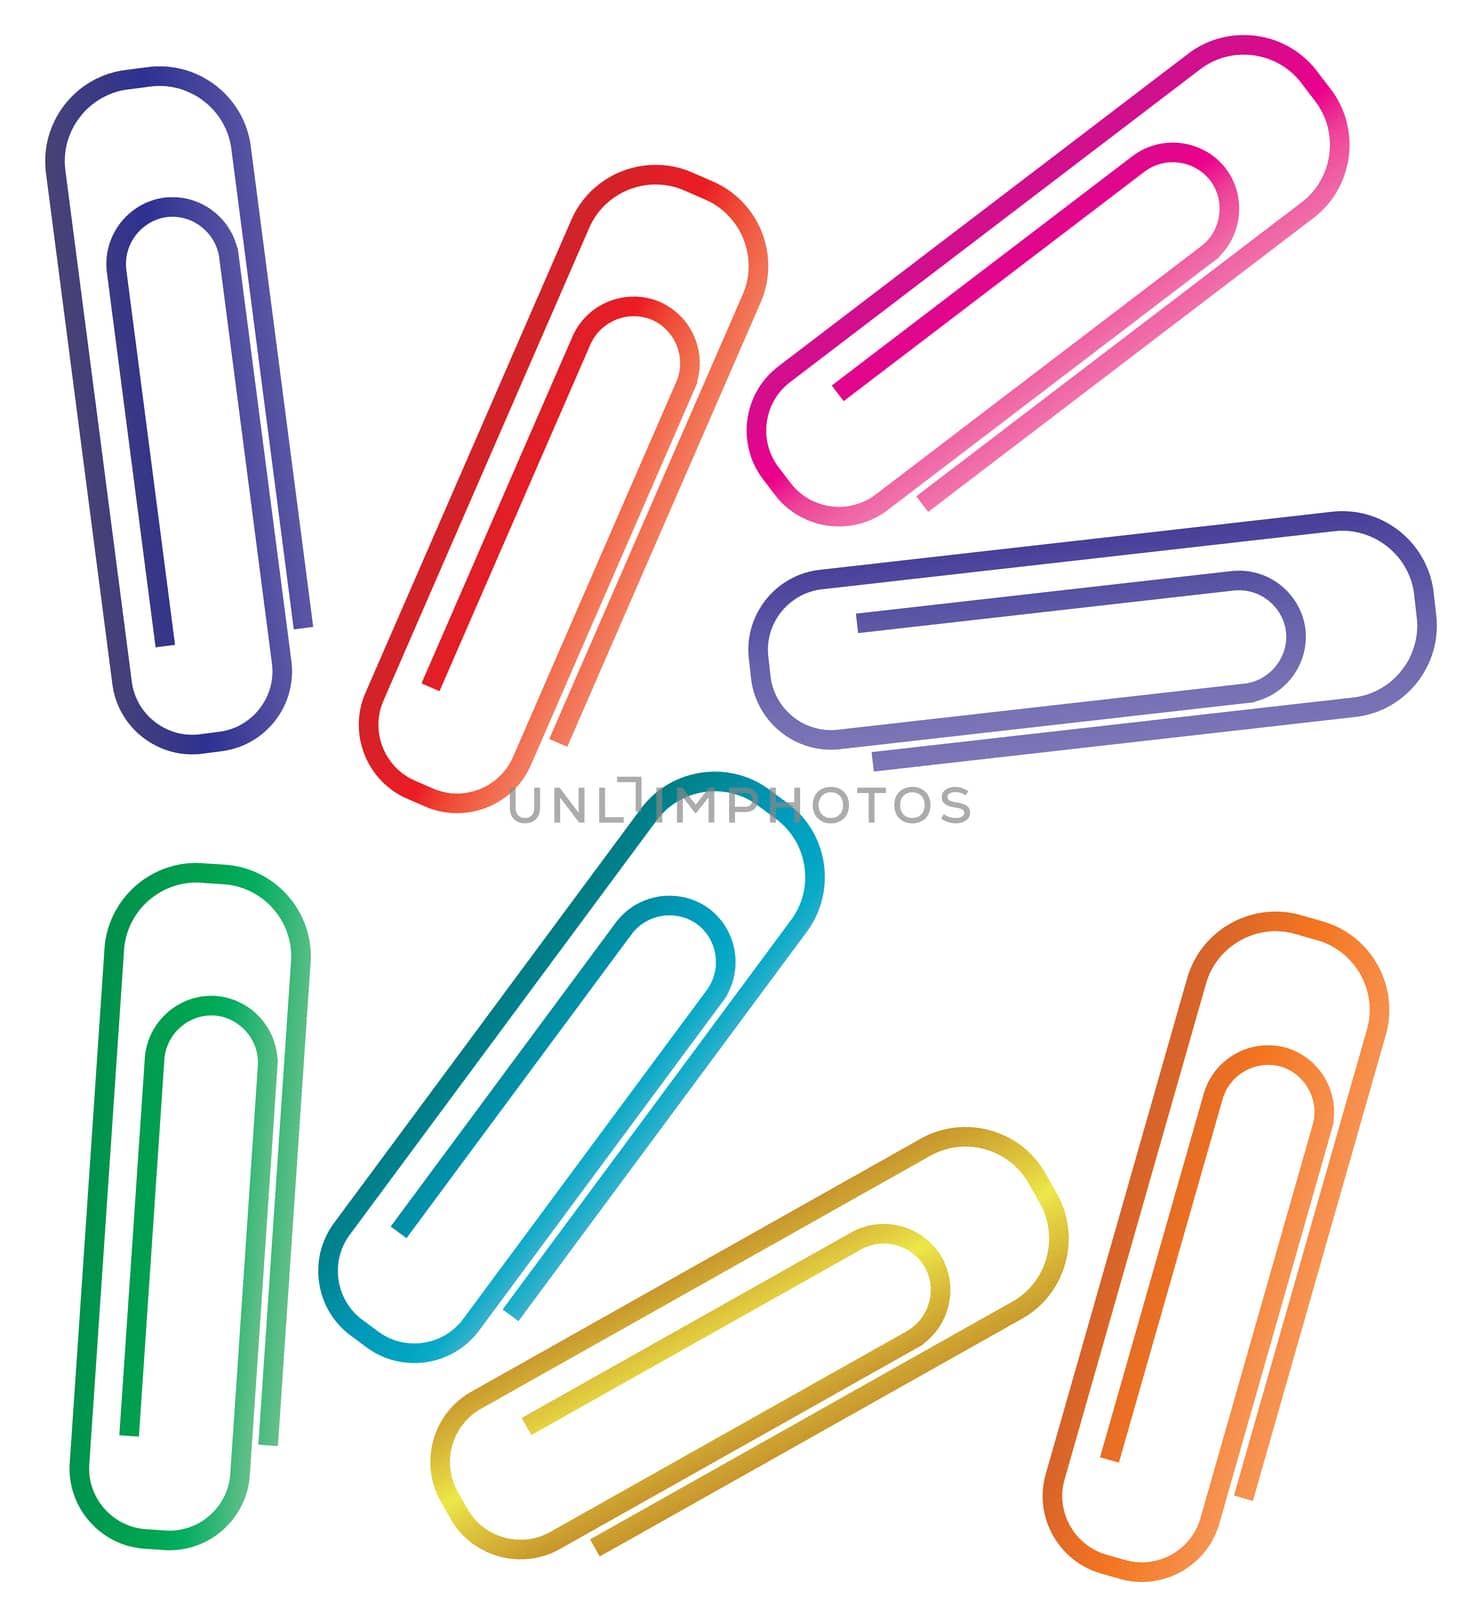 Colorful paper clips set isolated on white background.